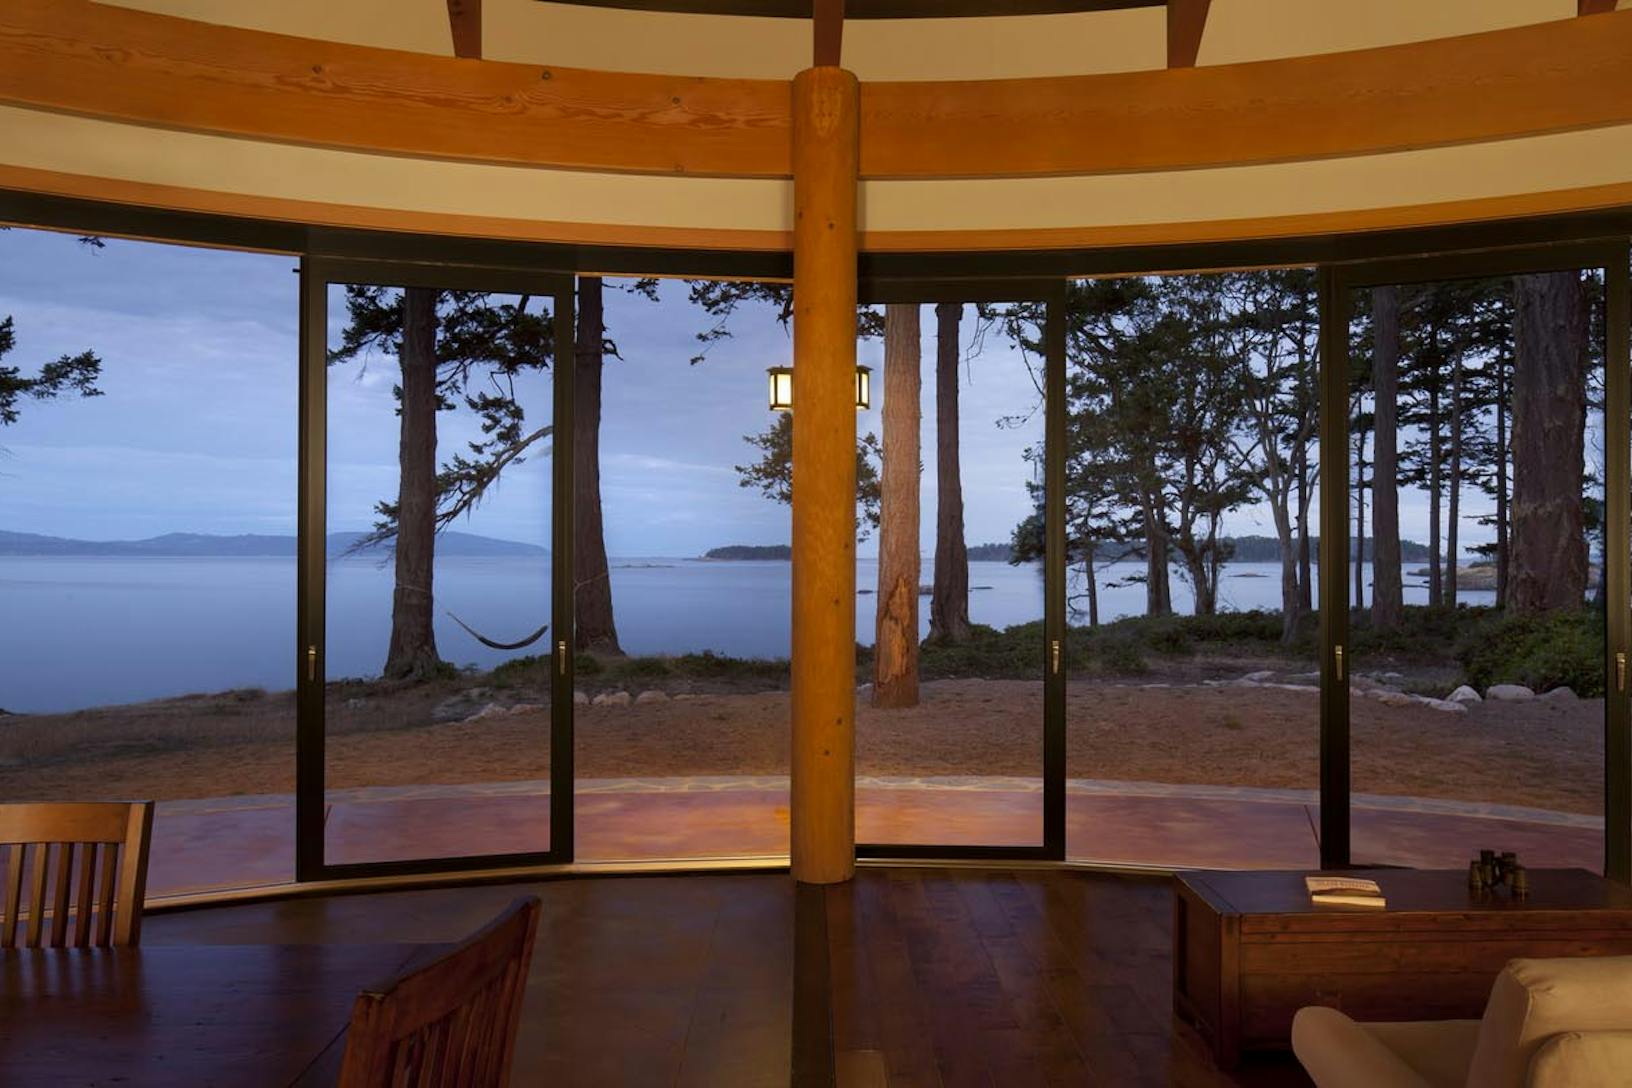 HSW60 cabin in the woods with segmented curved glass walls design